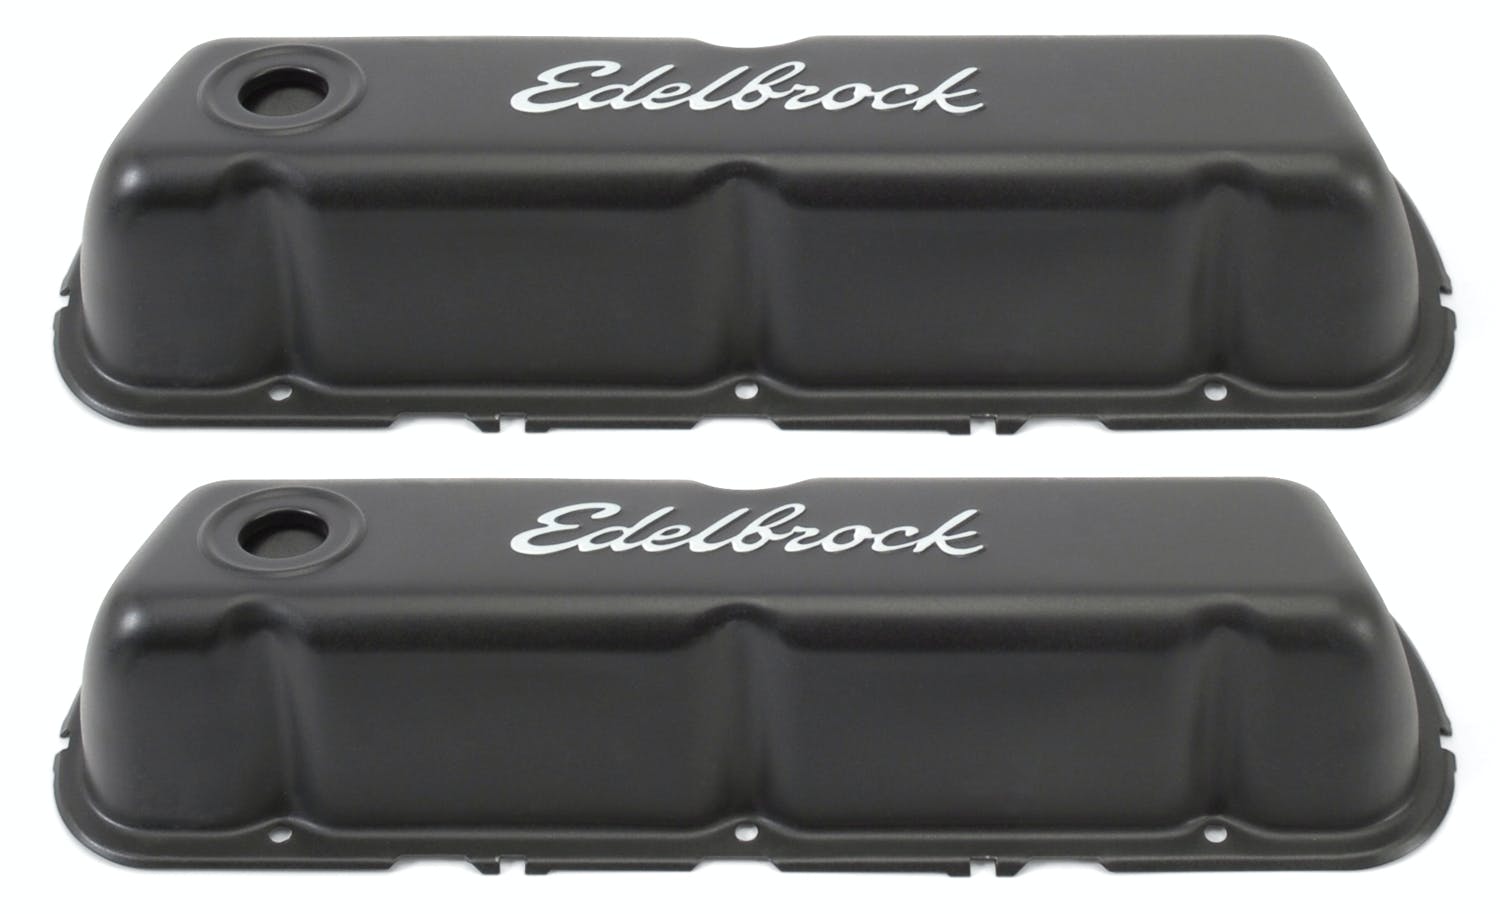 Edelbrock 4603 Signature Series Valve Covers for Ford 260-289-302 (not Boss) and 351W